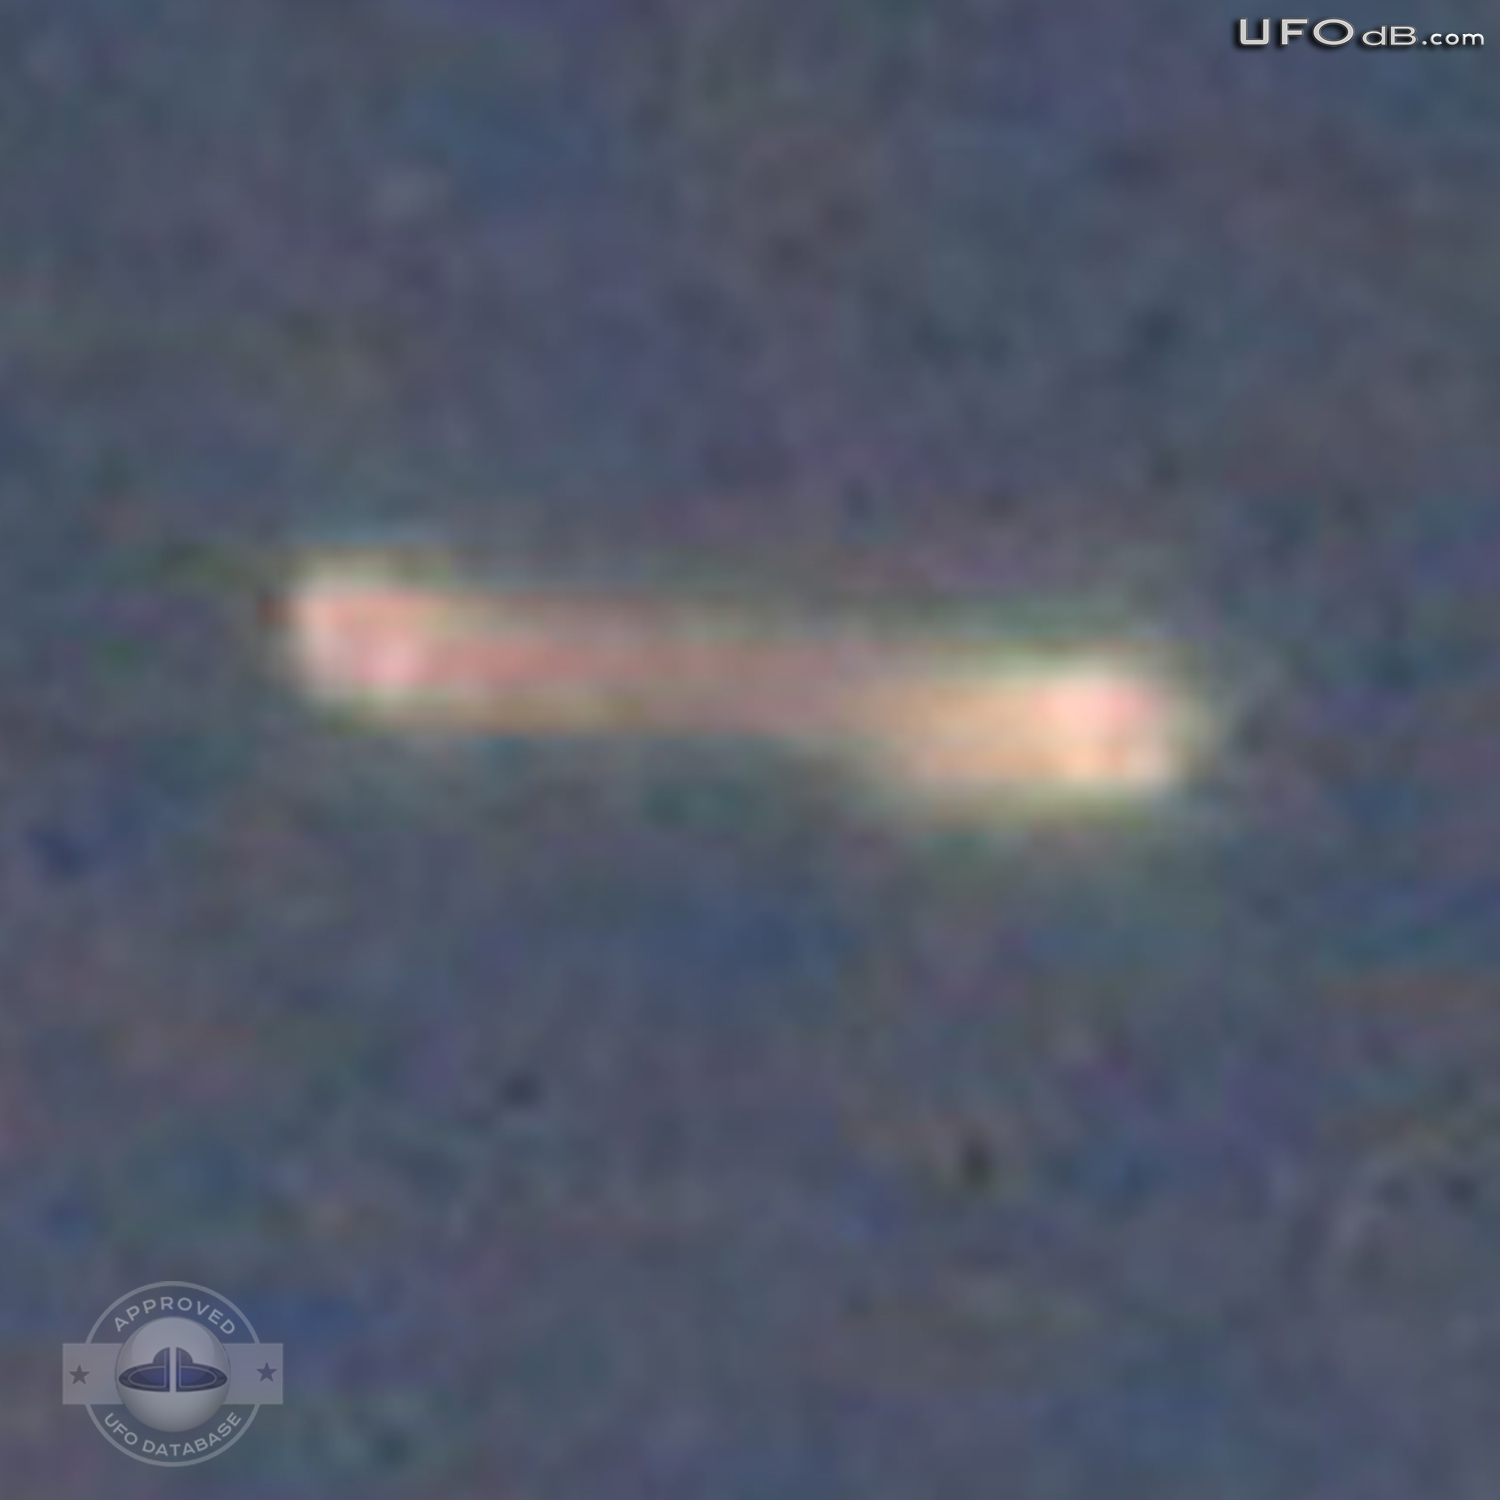 Changing Luminance UFO caught on picture | Katy, Texas | April 6 2011 UFO Picture #306-4